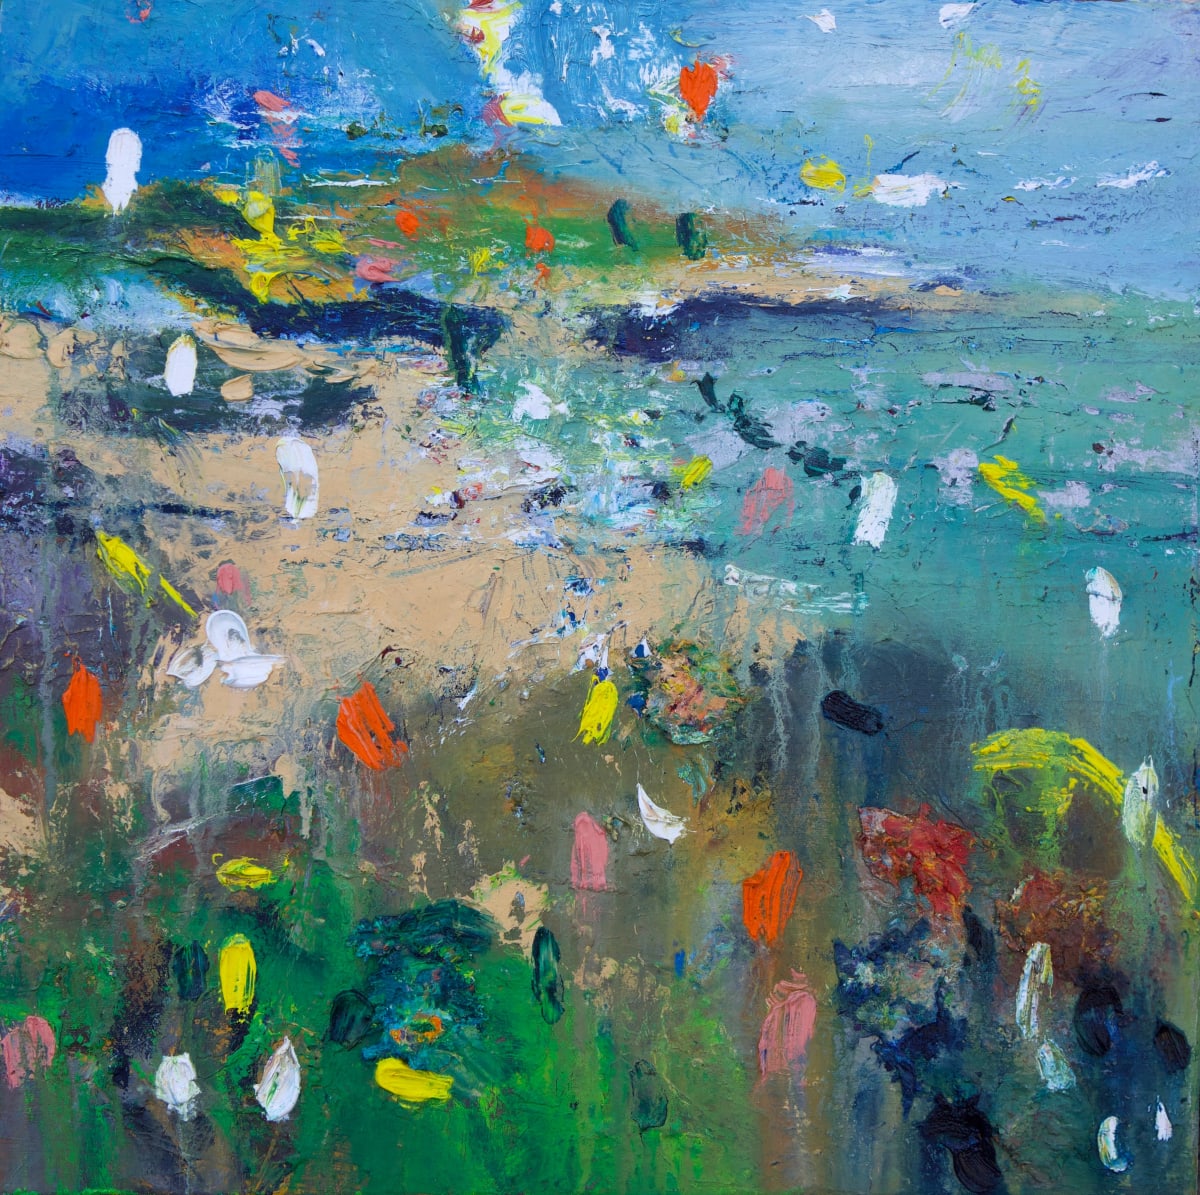 Captivated by Stephen Bishop  Image: Available from Gallery Tresco 

https://www.tresco.co.uk/enjoying/gallery-tresco/artists/stephen-bishop